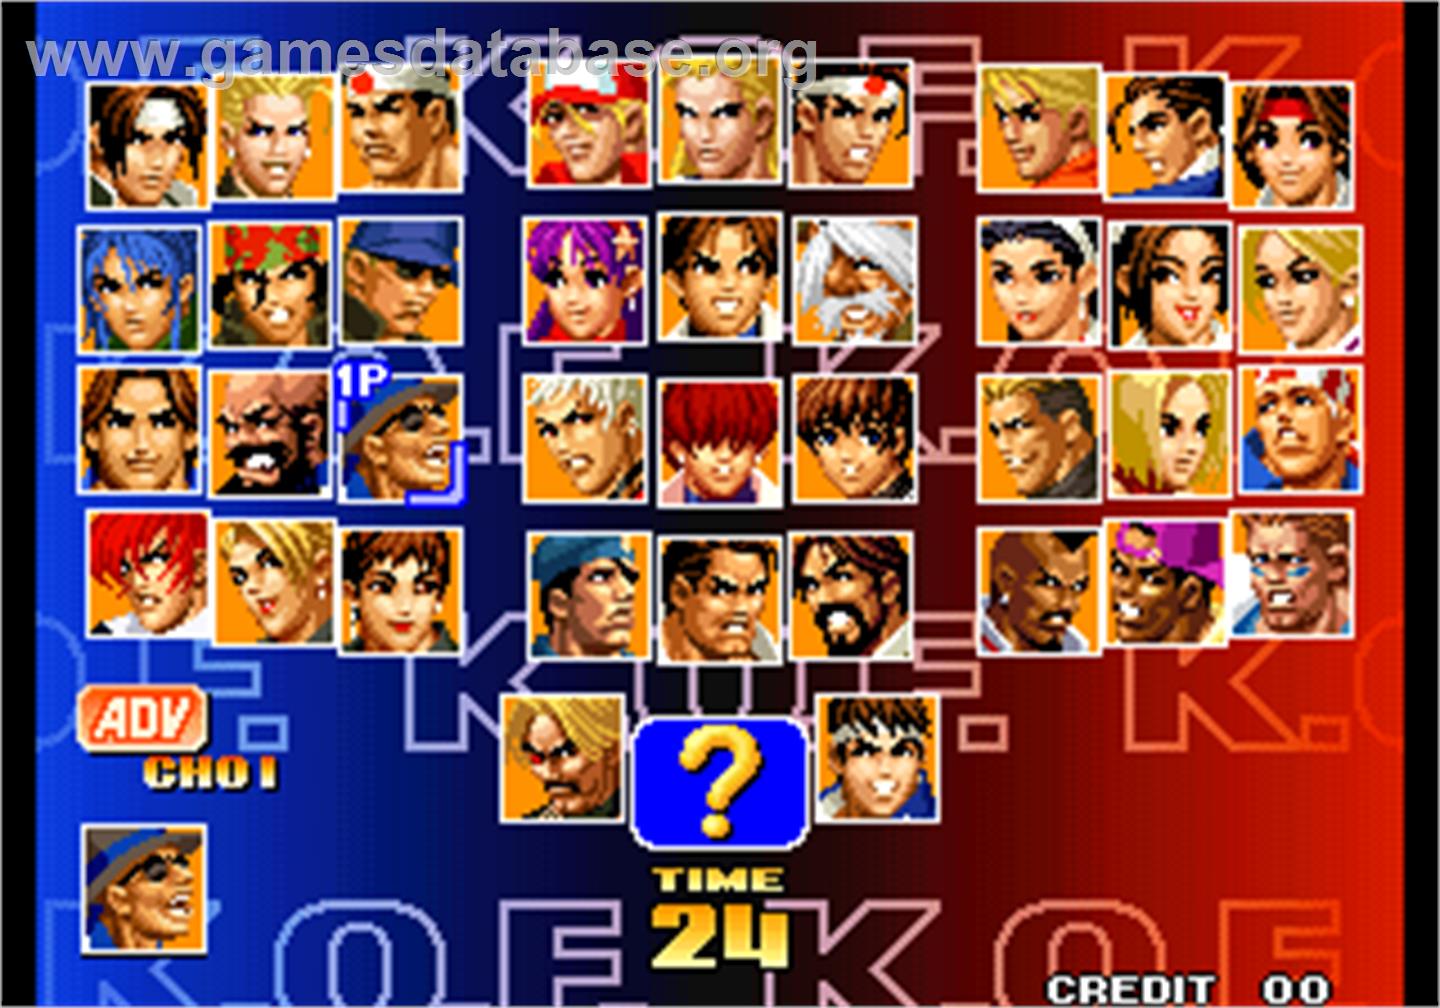 The King of Fighters '98 - The Slugfest / King of Fighters '98 - dream match never ends - Arcade - Artwork - Select Screen